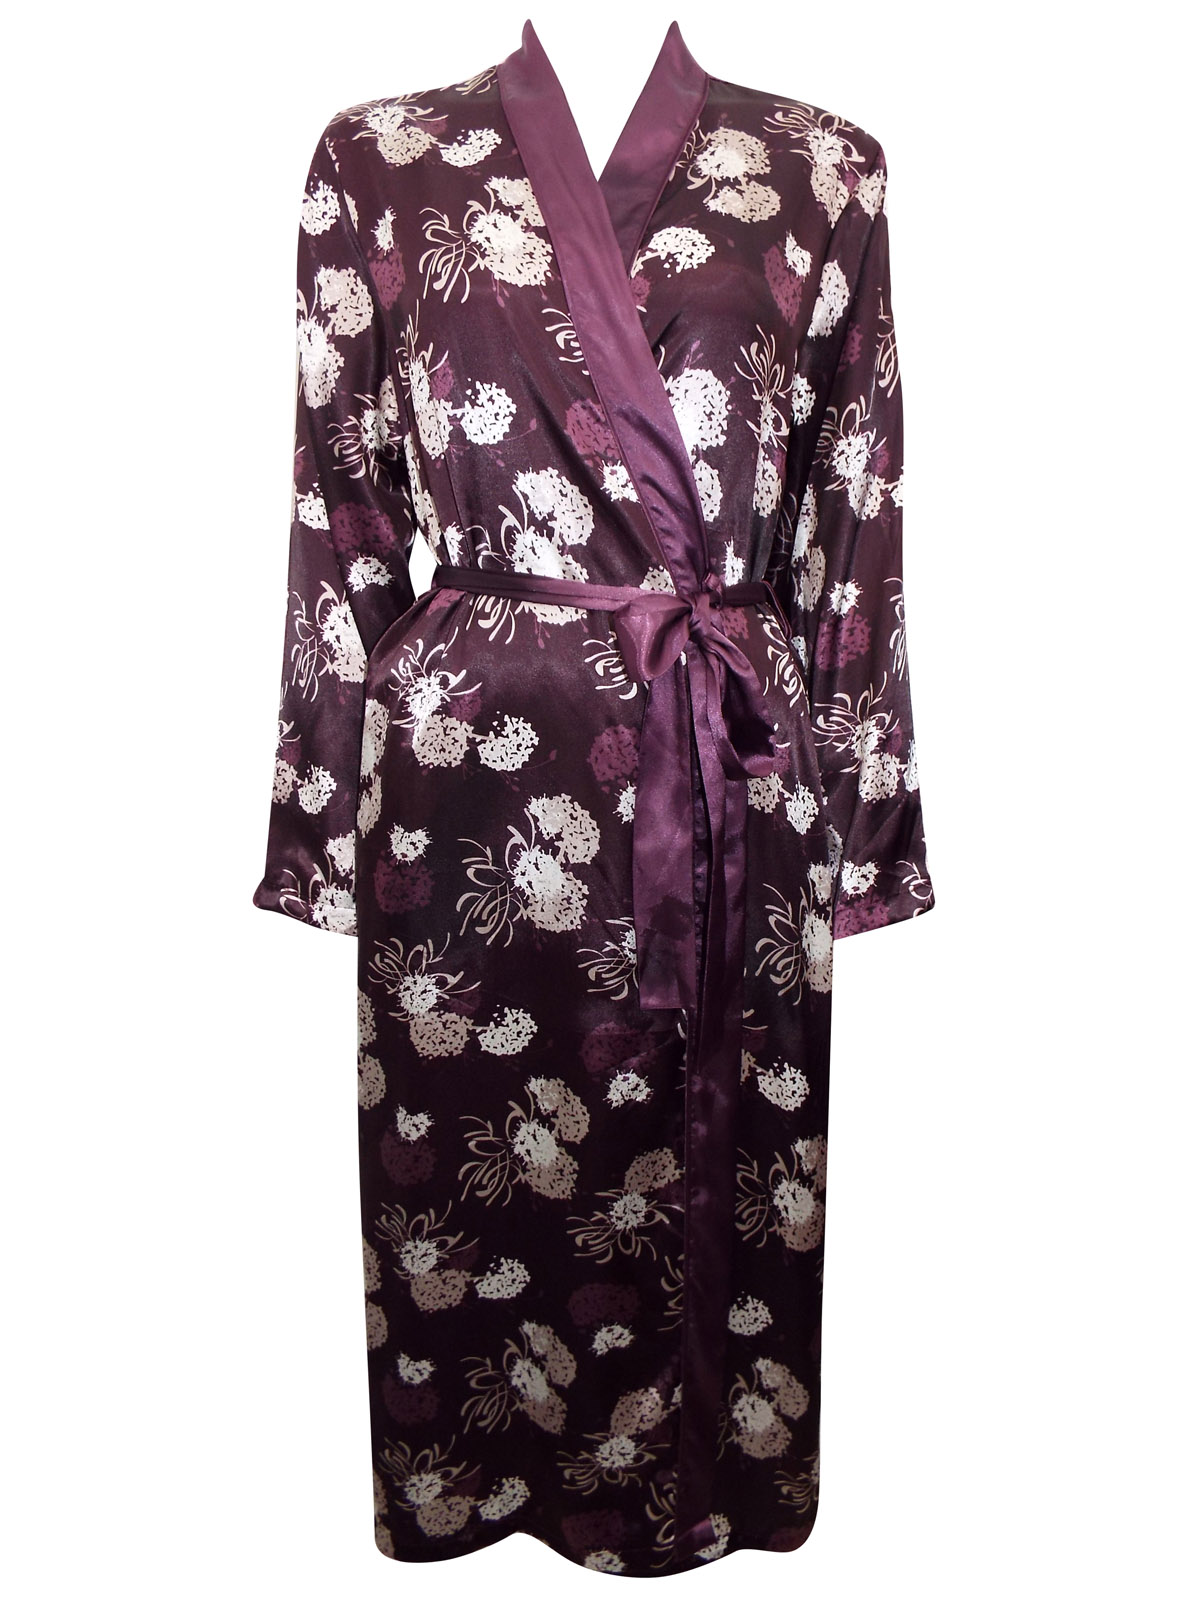 PLUM Floral Satin Dressing Gown - Size 12/14 to 20/22